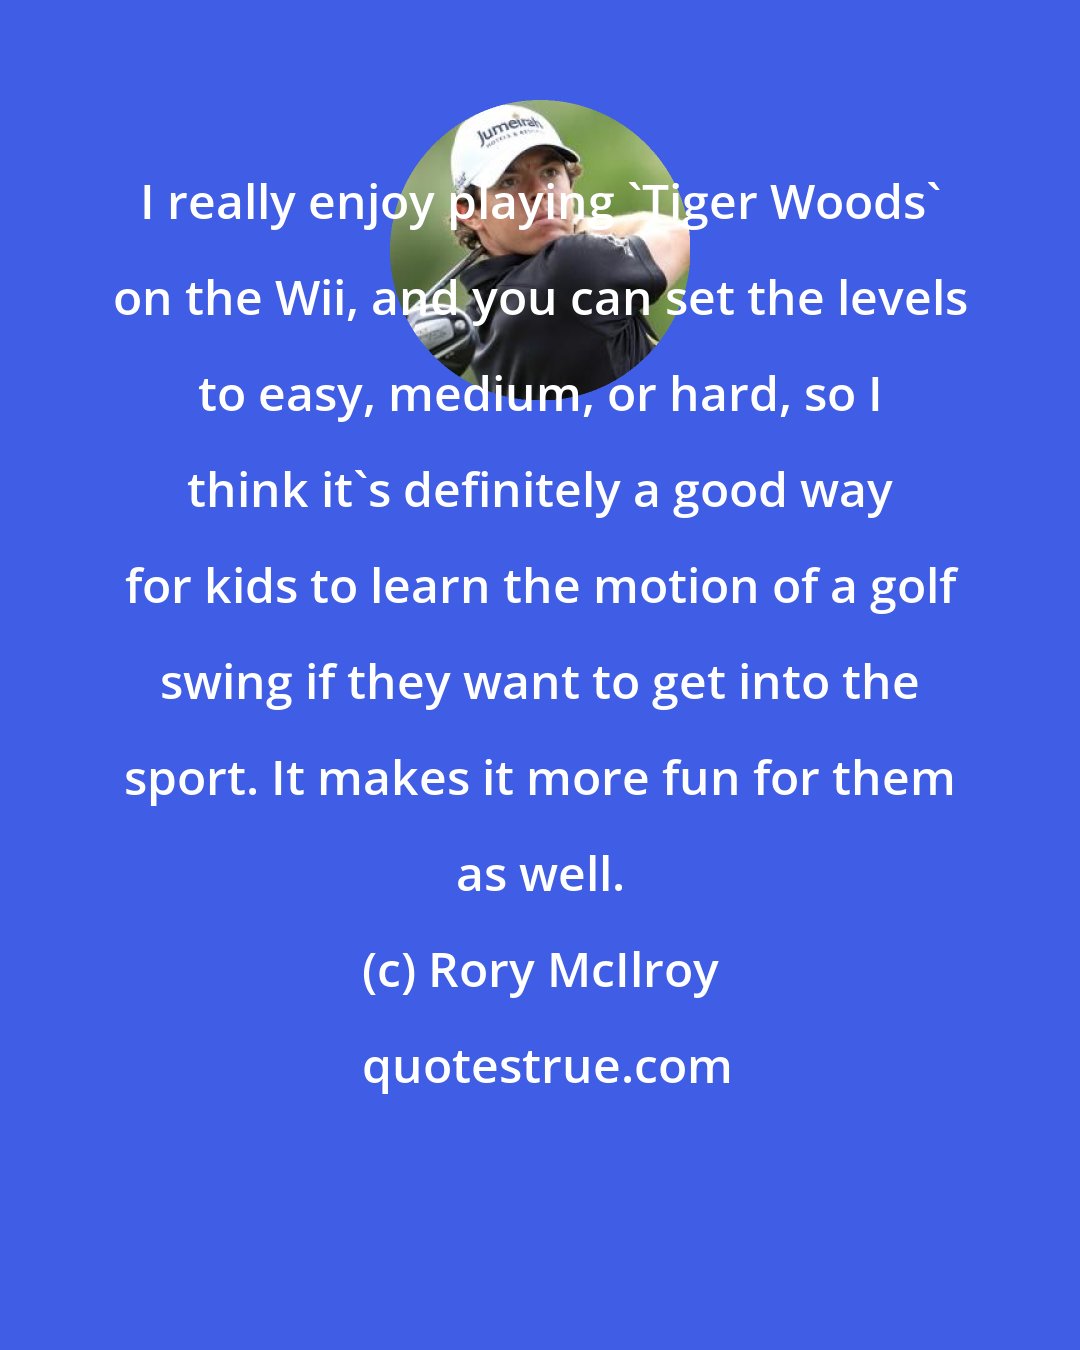 Rory McIlroy: I really enjoy playing 'Tiger Woods' on the Wii, and you can set the levels to easy, medium, or hard, so I think it's definitely a good way for kids to learn the motion of a golf swing if they want to get into the sport. It makes it more fun for them as well.